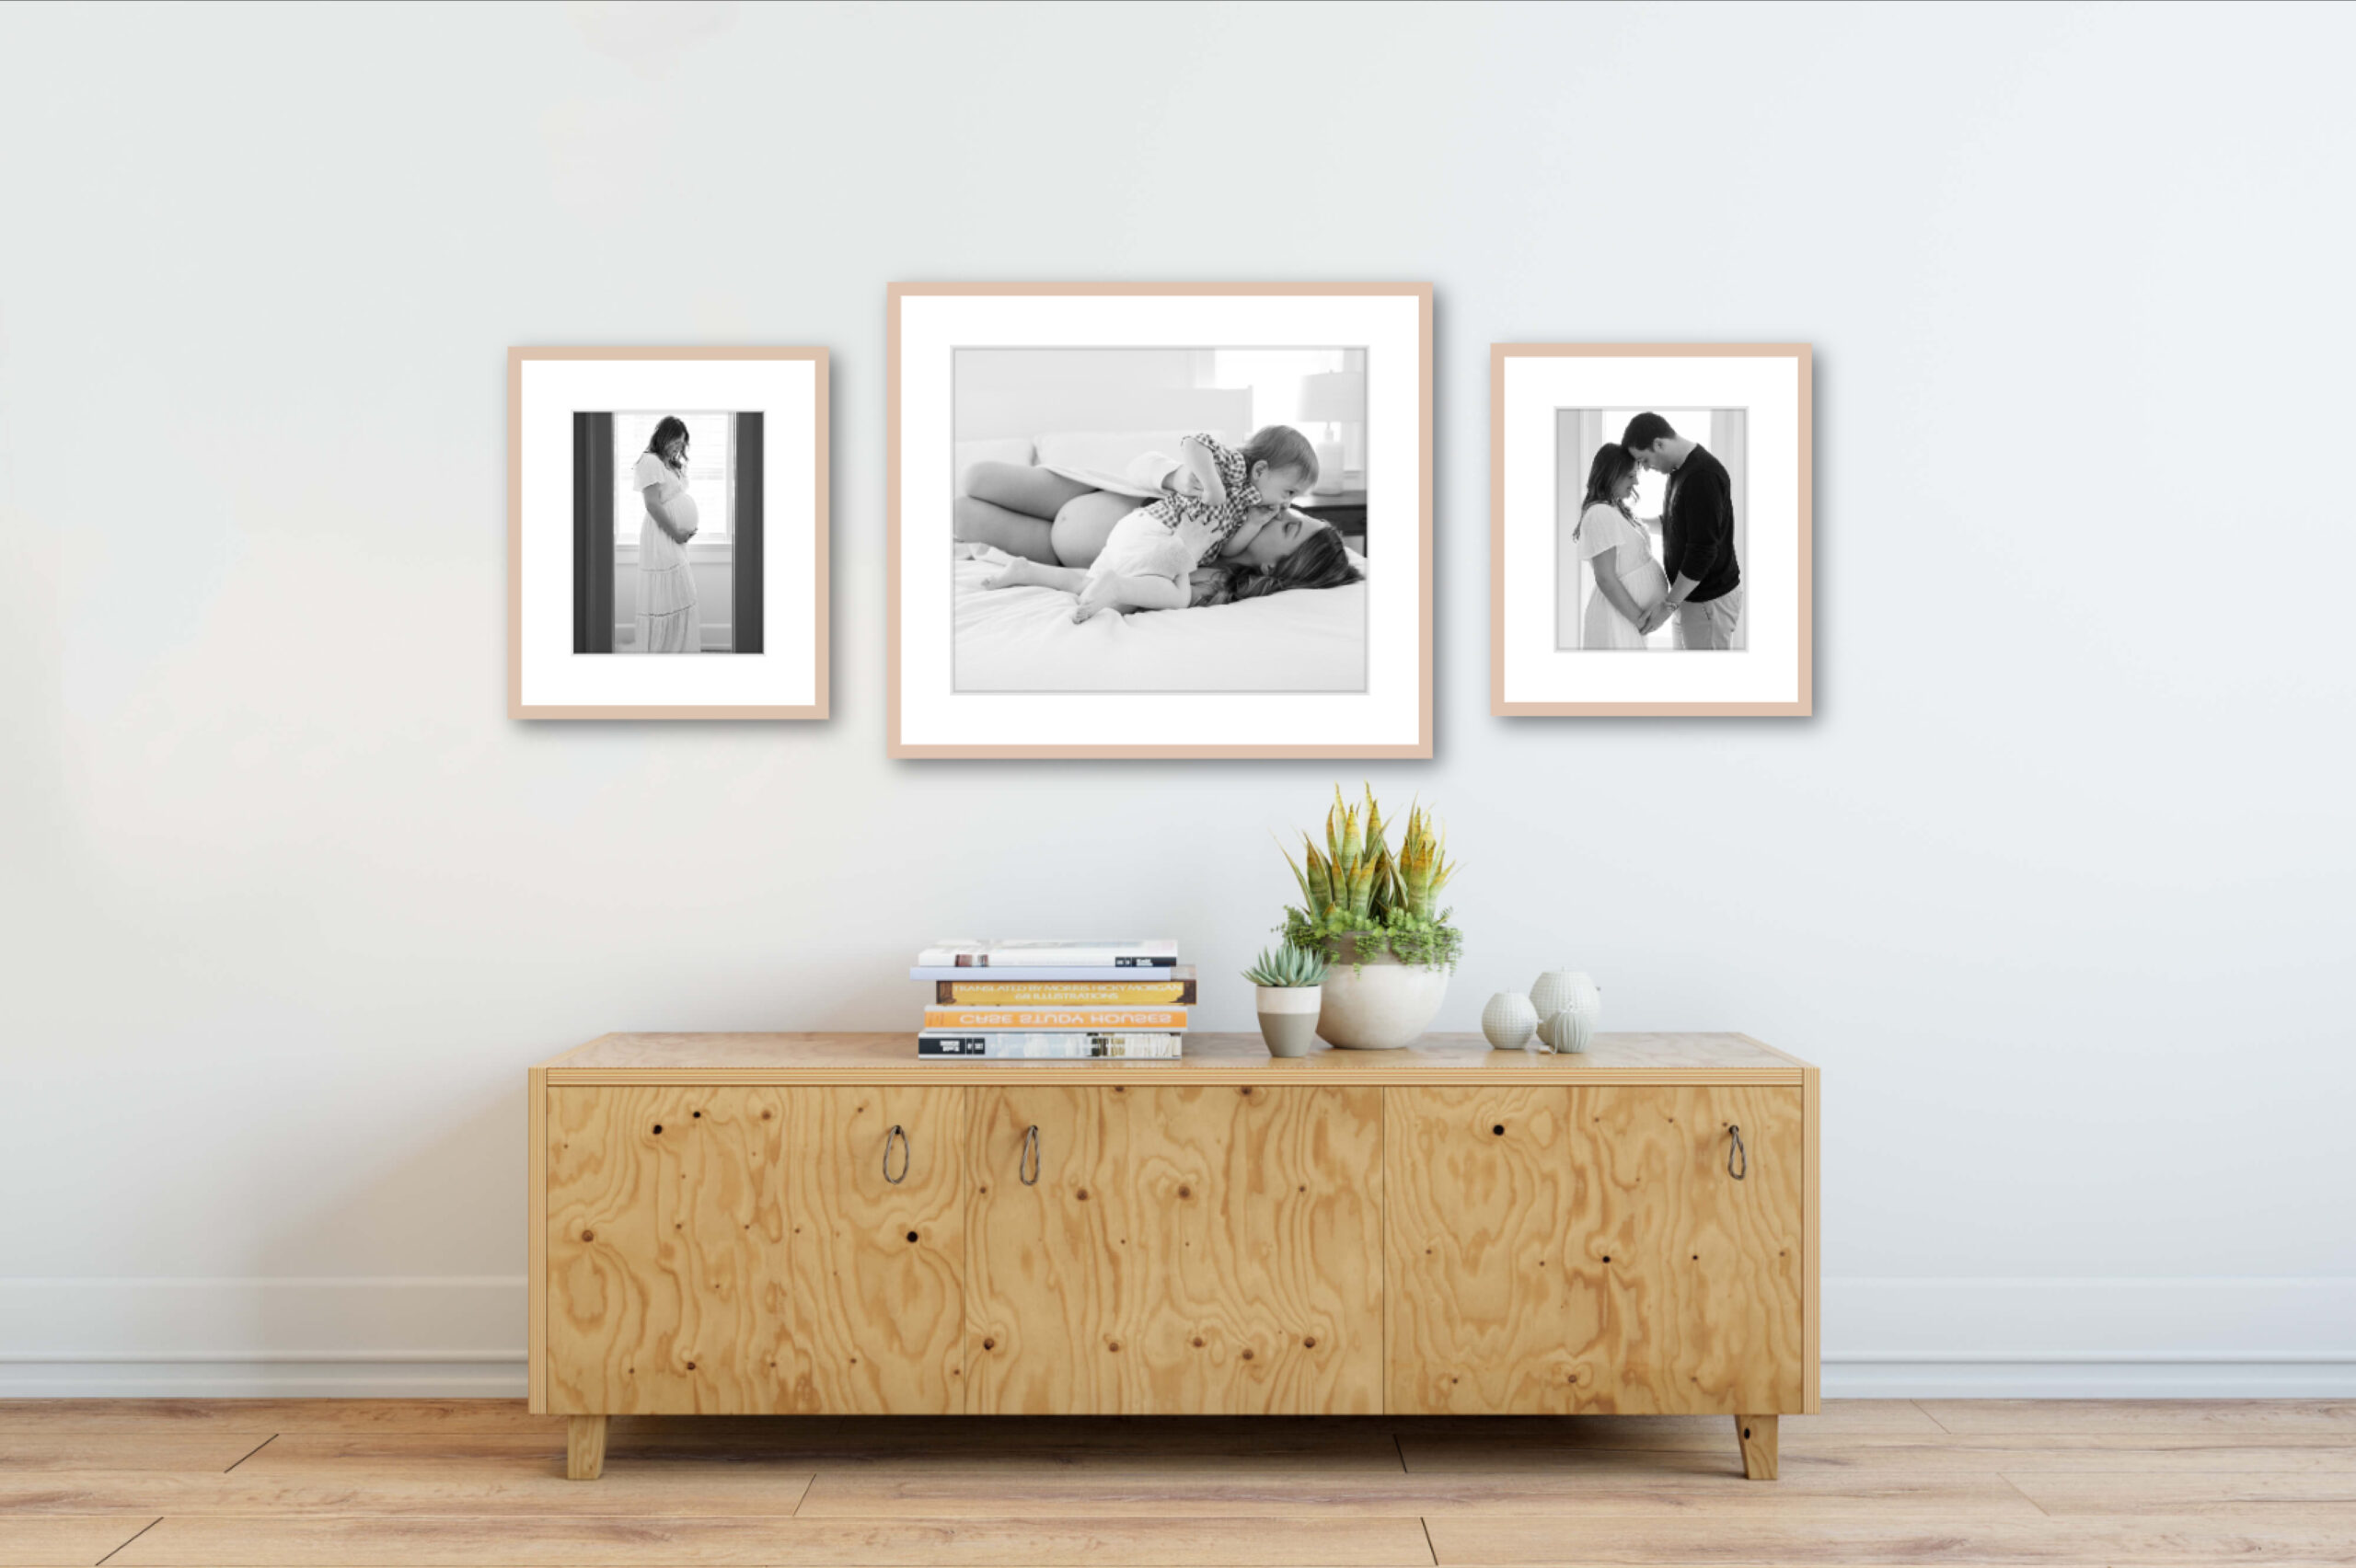 Framed photos of newborn photography hang on a wall in a Greenwich, CT home.